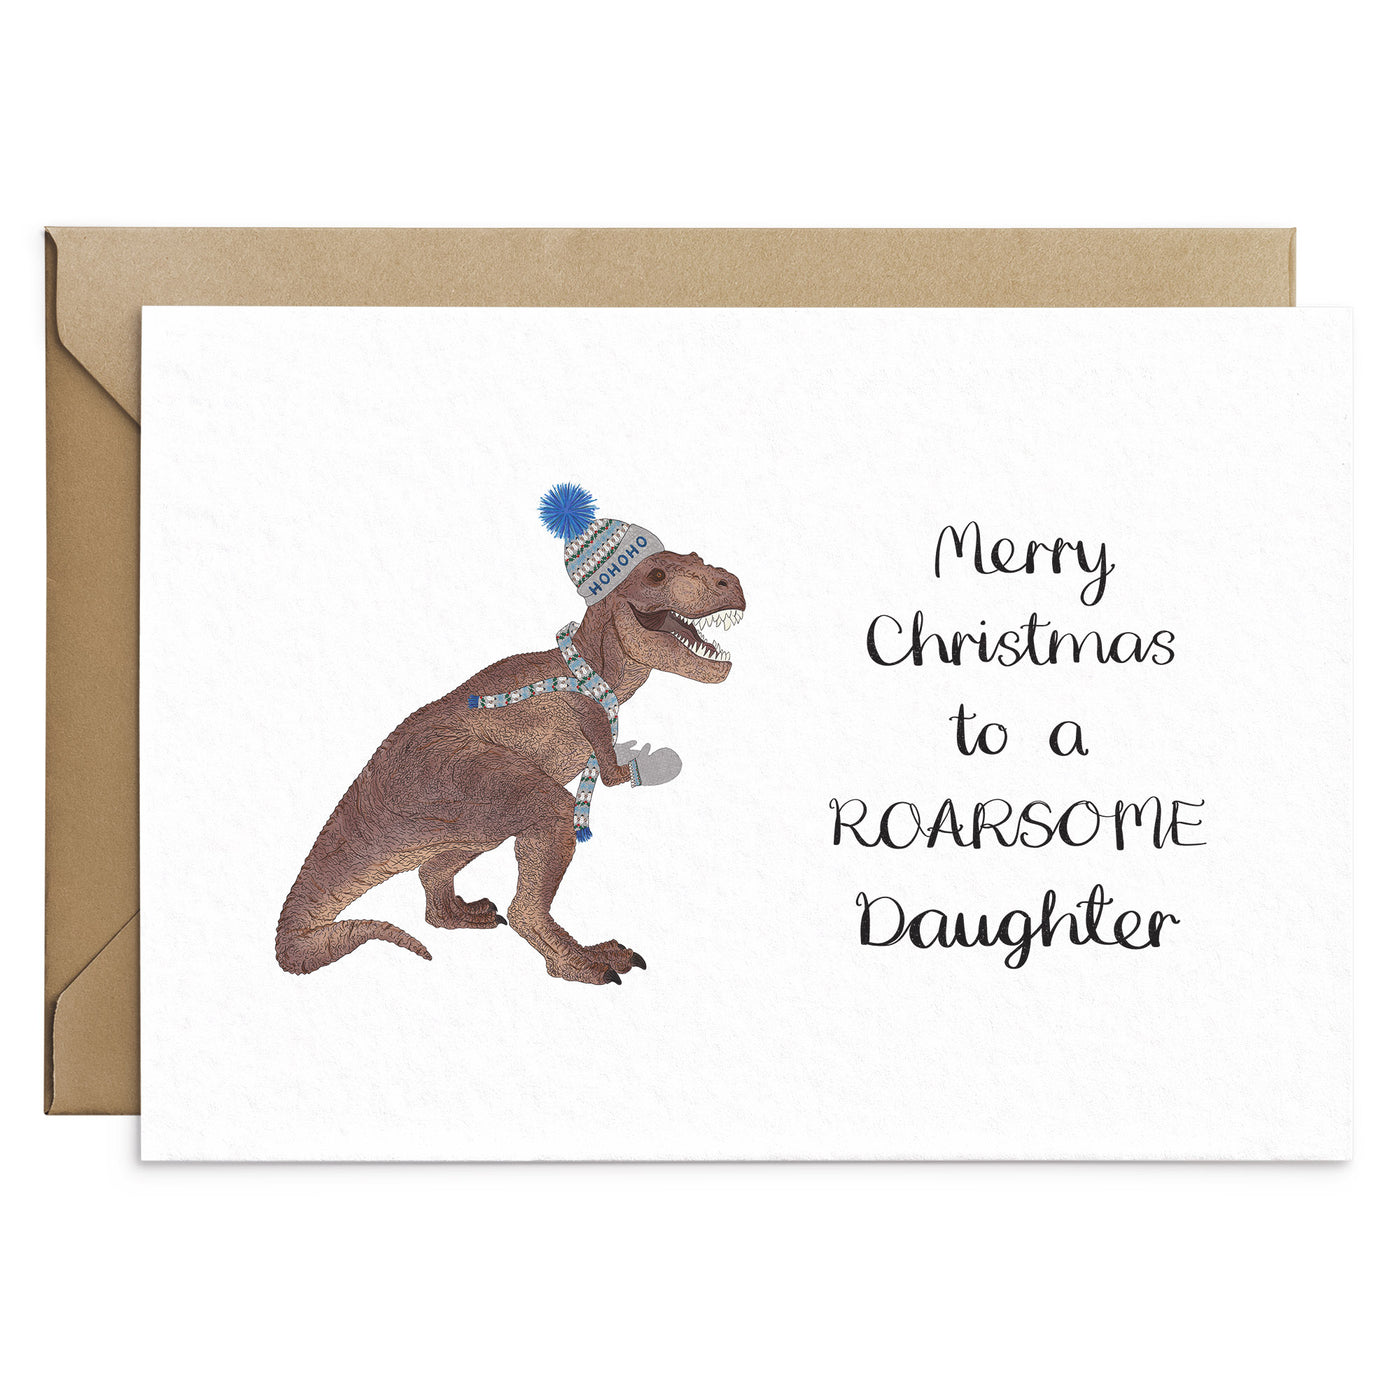 Roarsome Daughter Dinosaur Christmas Card - Poppins & Co.